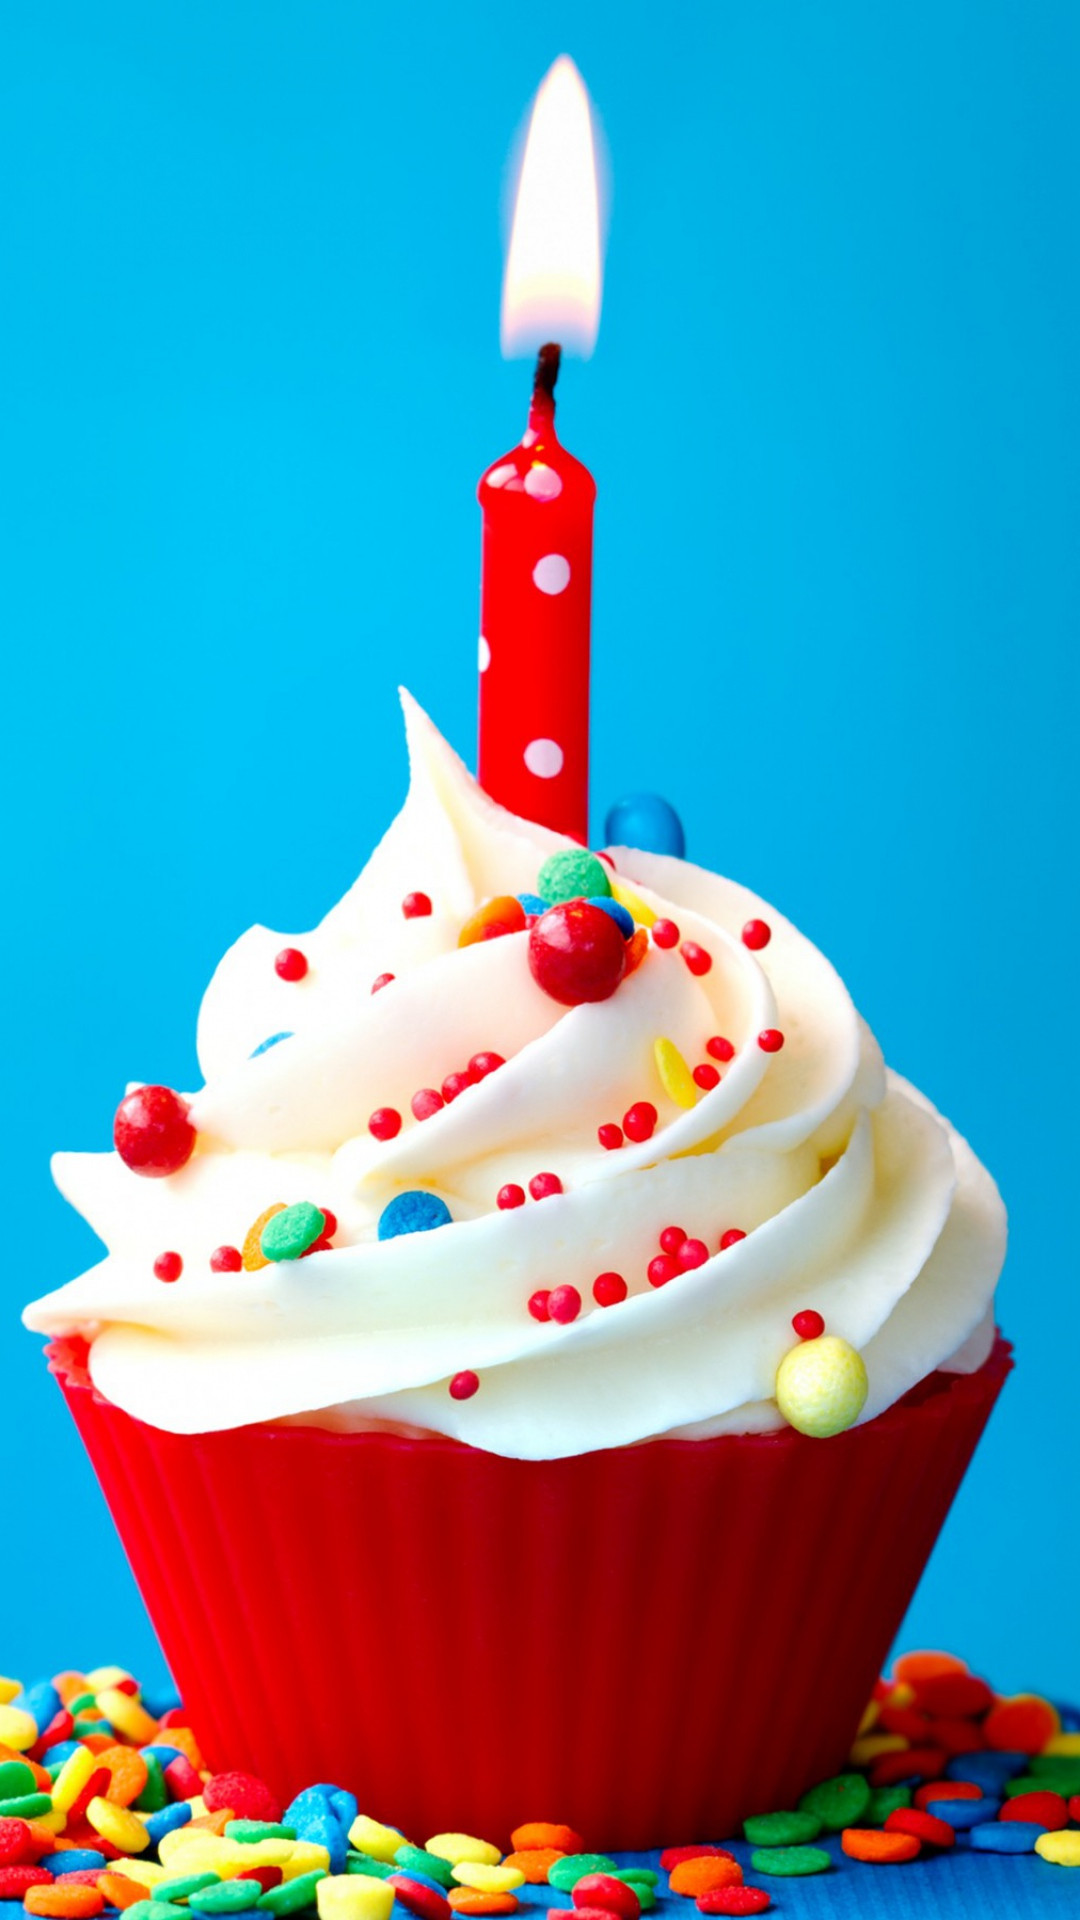 Birthday Cake Wallpaper
 Birthday cake Best htc one wallpapers free and easy to